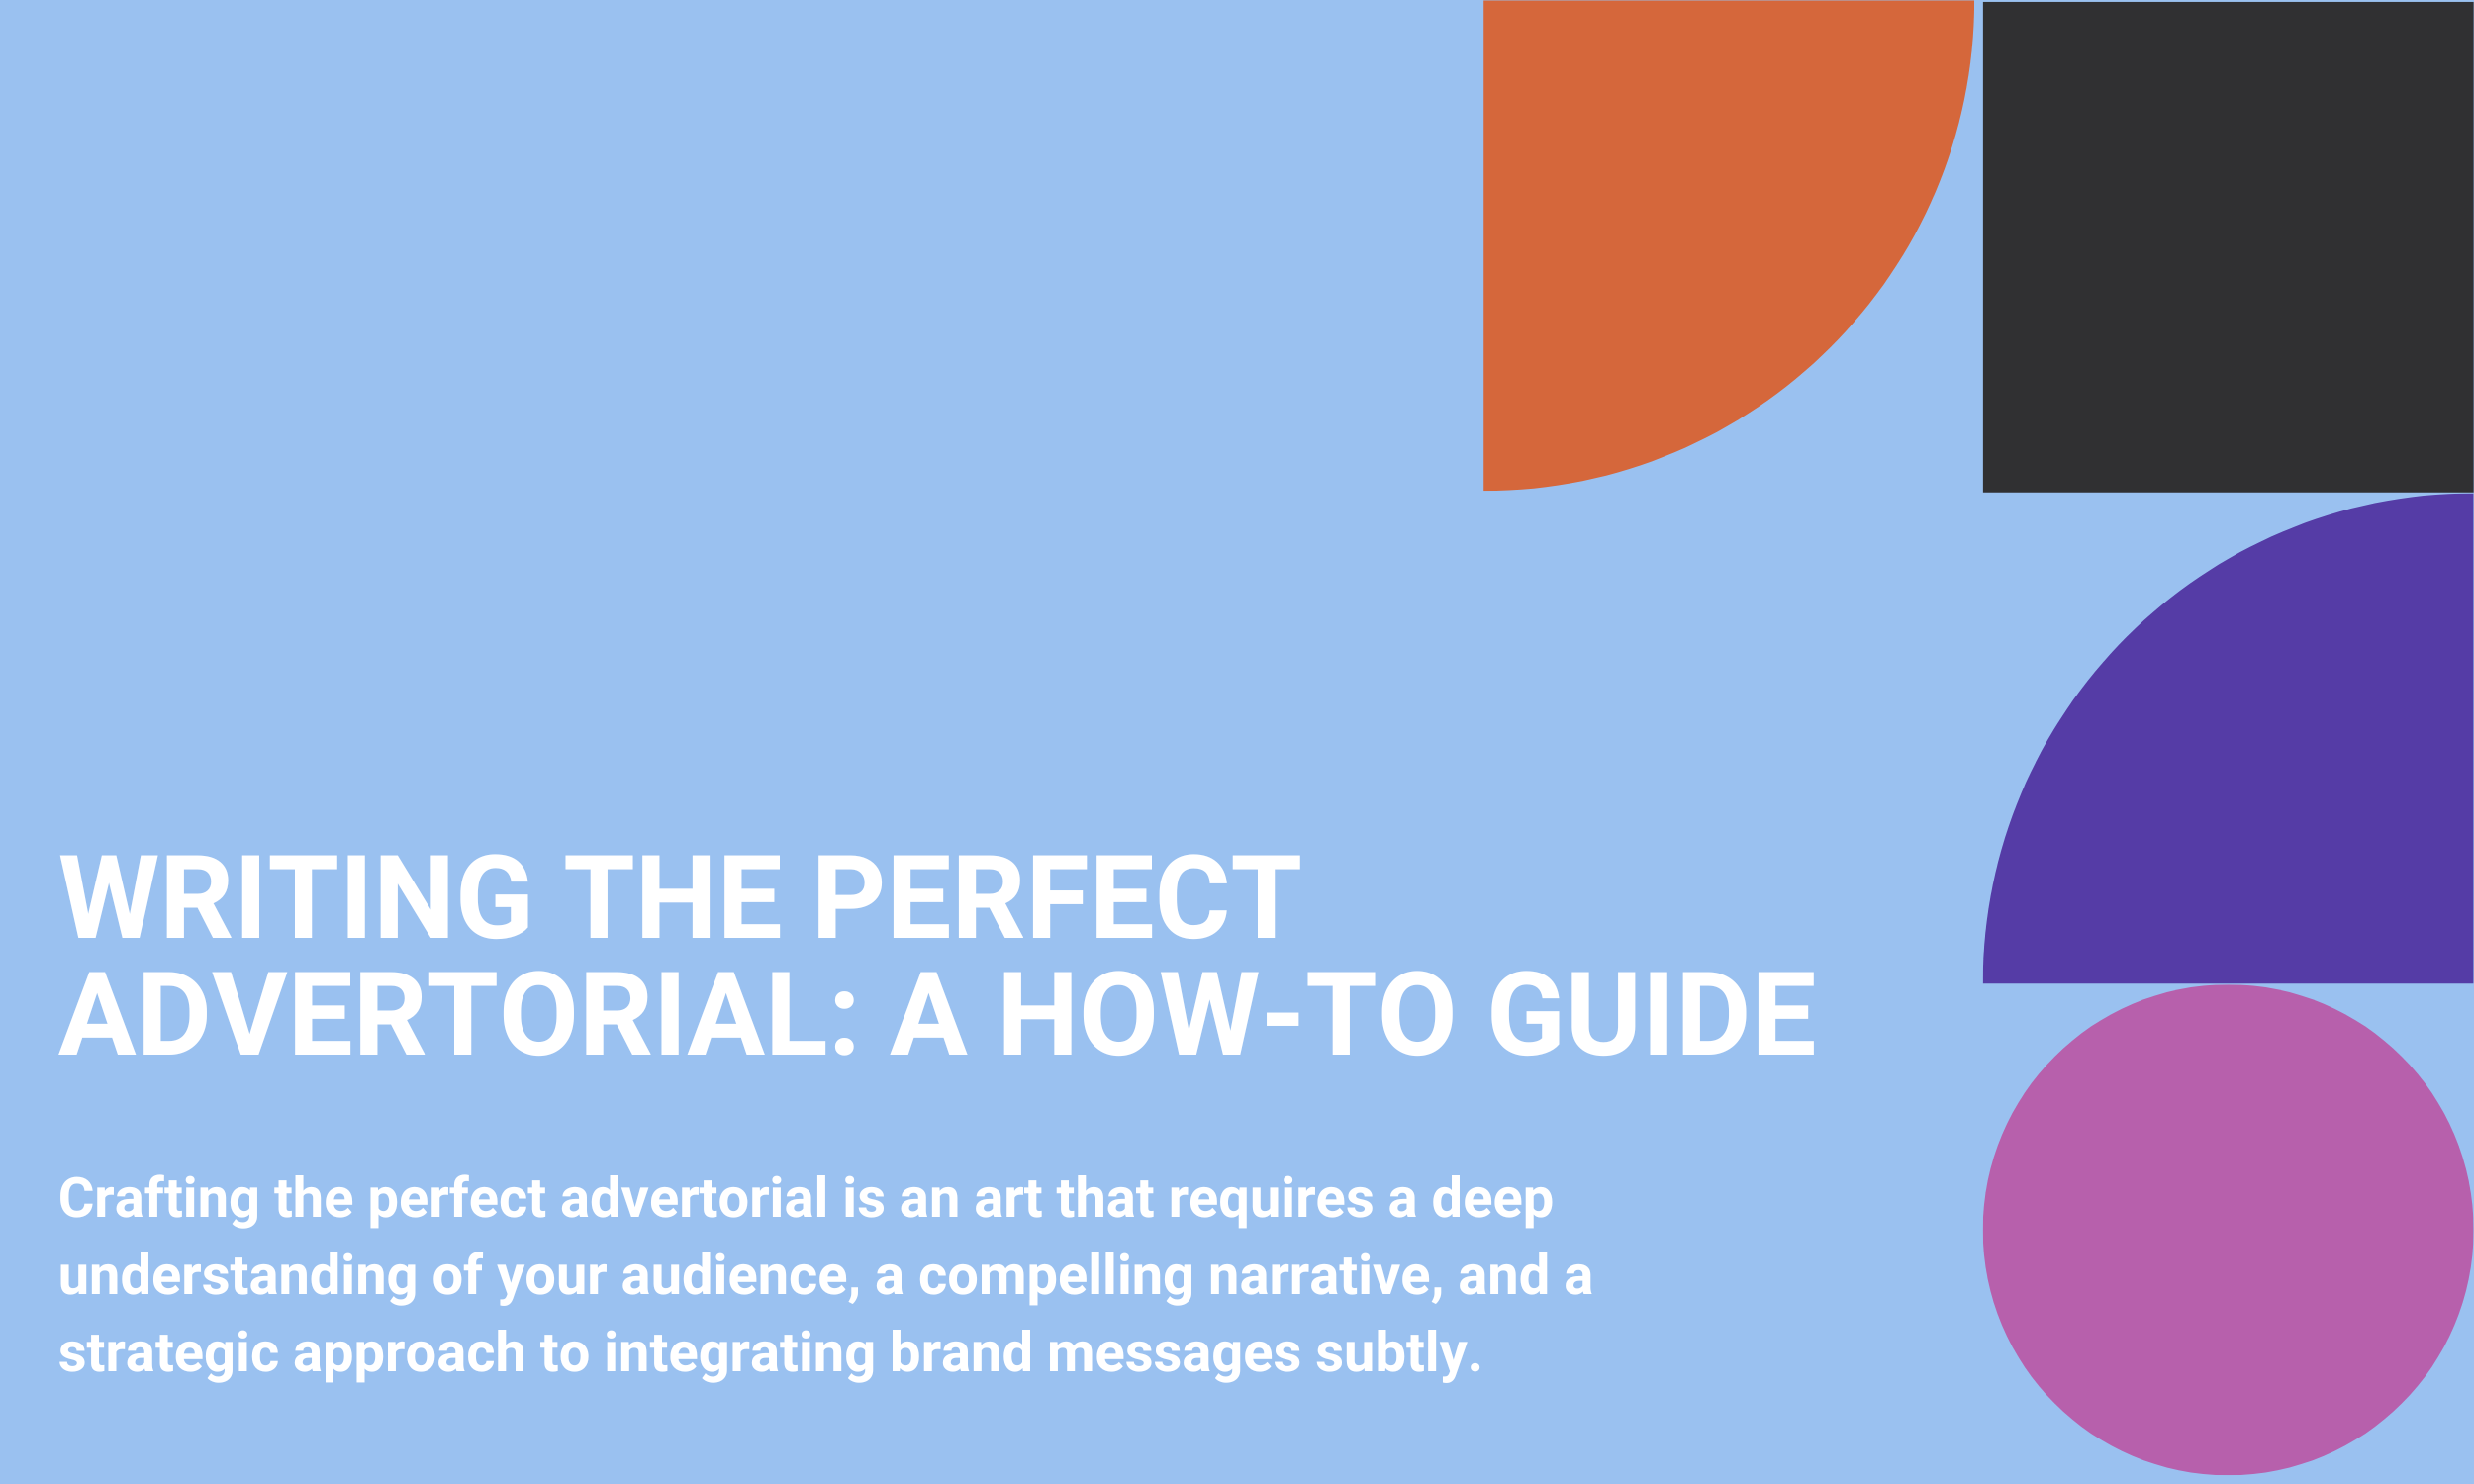 Writing the Perfect Advertorial: A How-To Guide